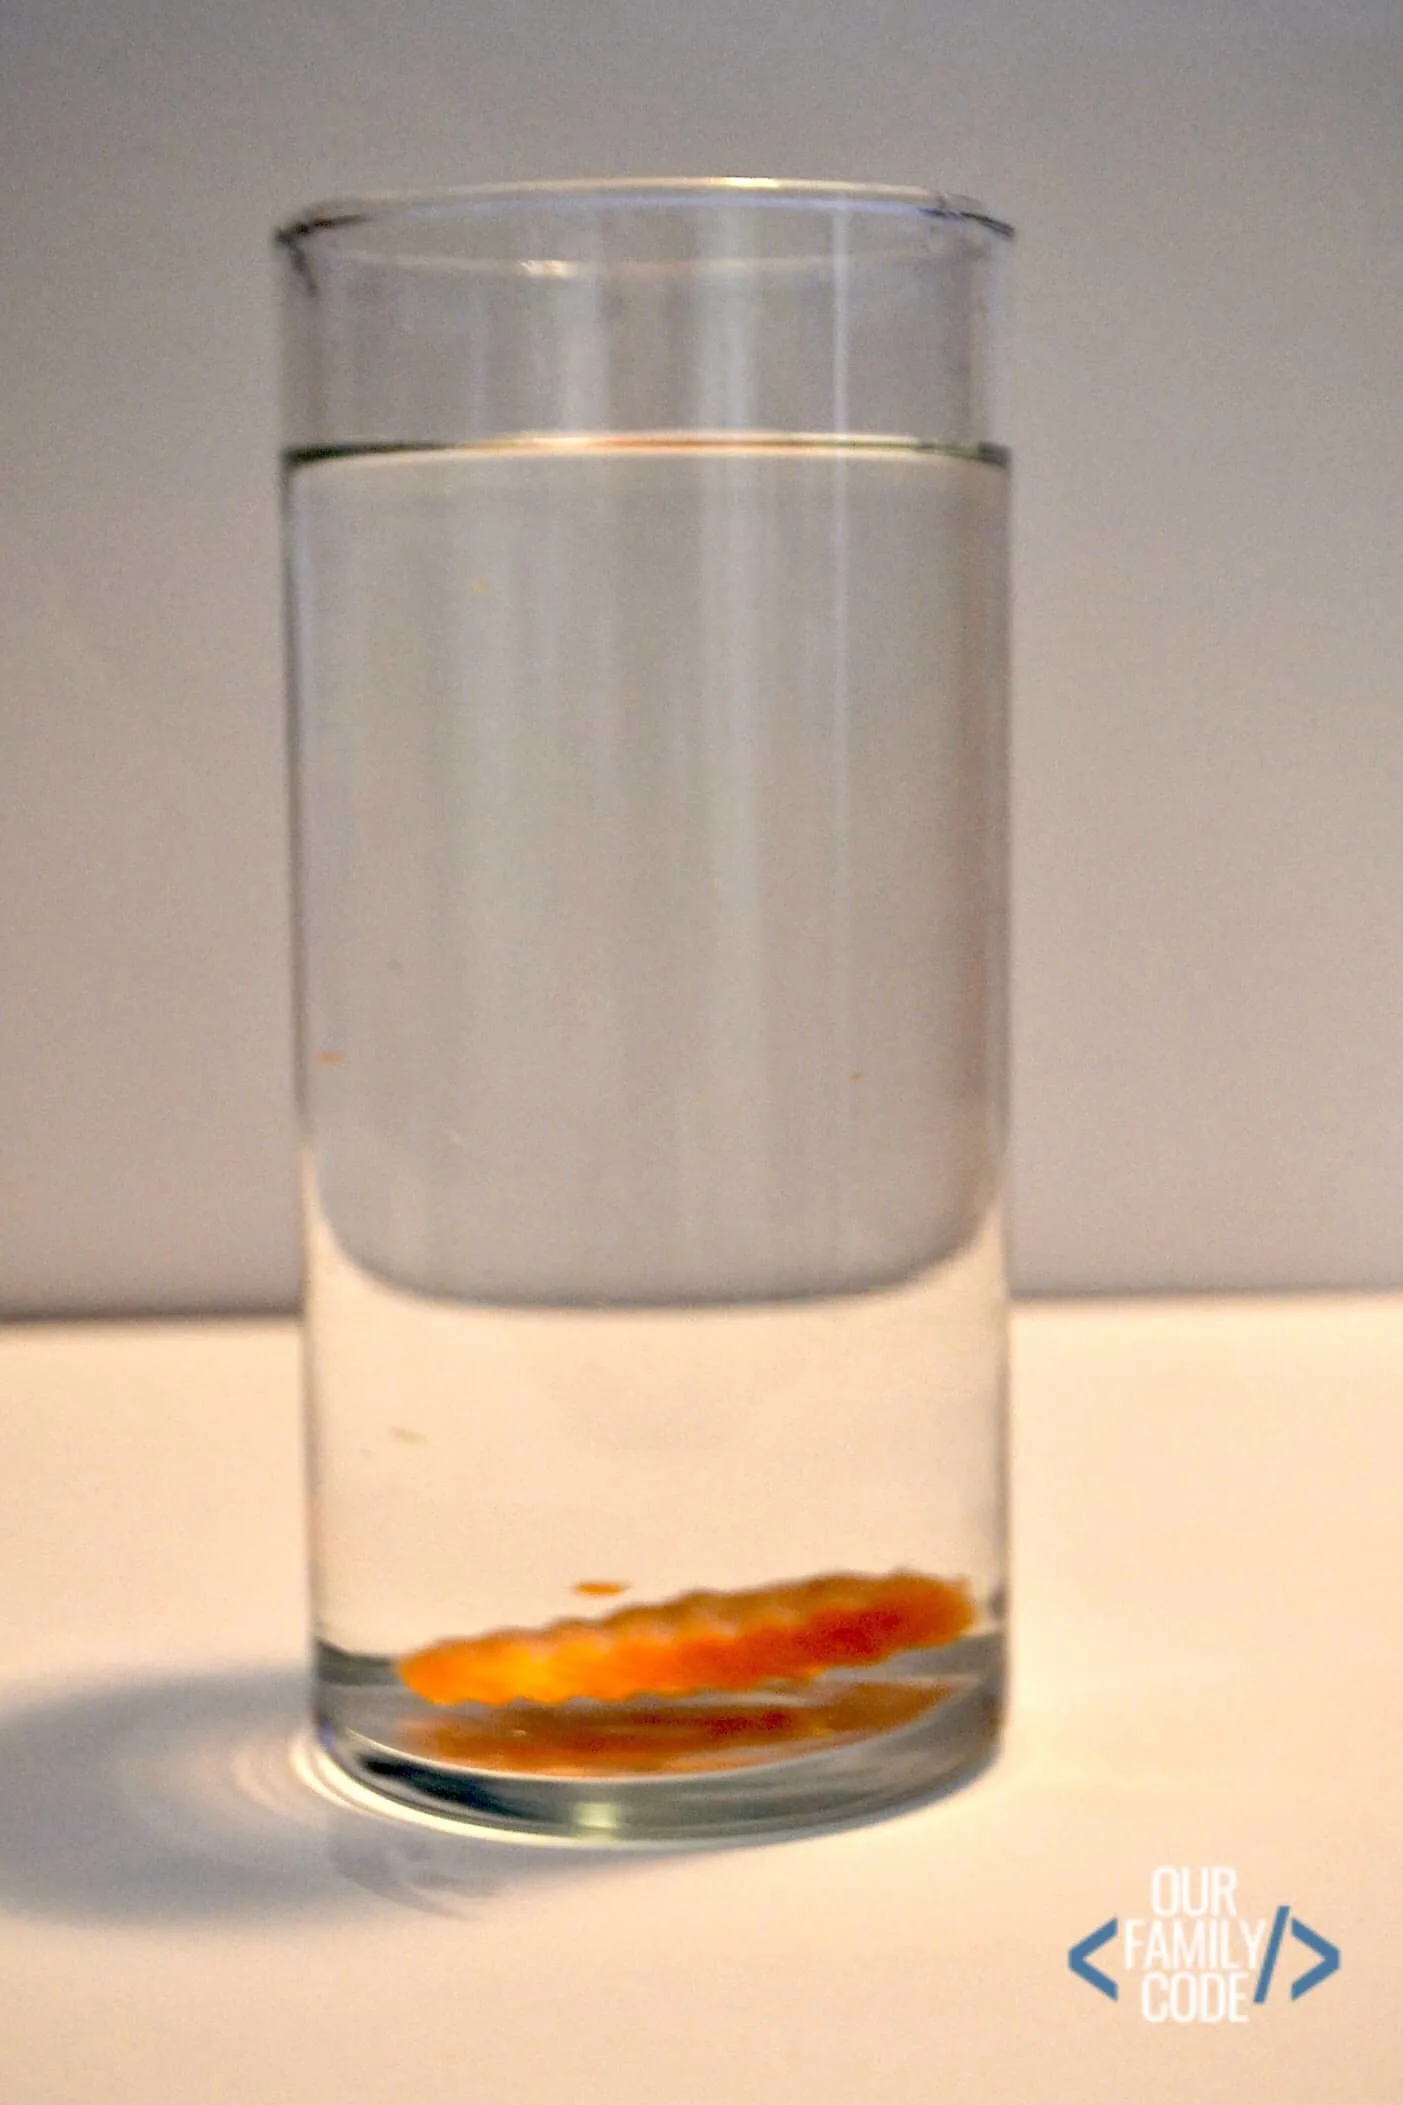 Sinking Carrot in Fresh Water Density Experiment